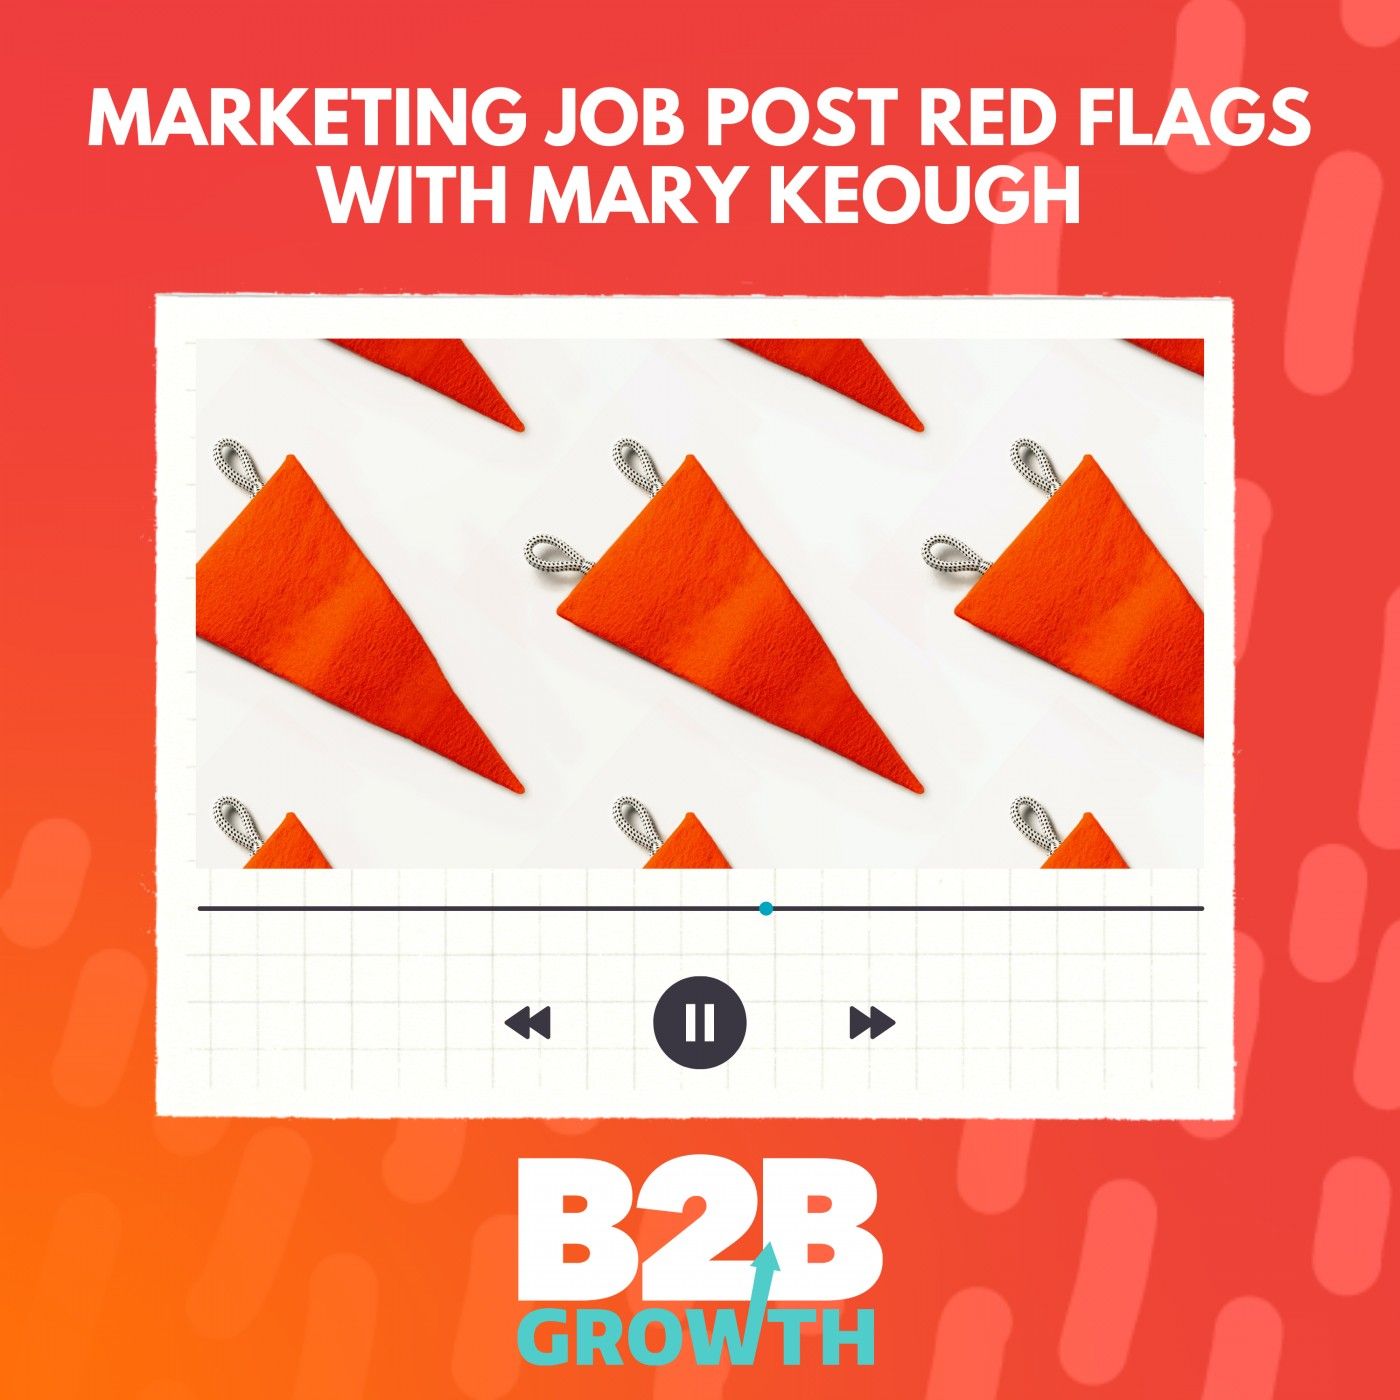 Marketing Job Post Red Flags with Mary Keough